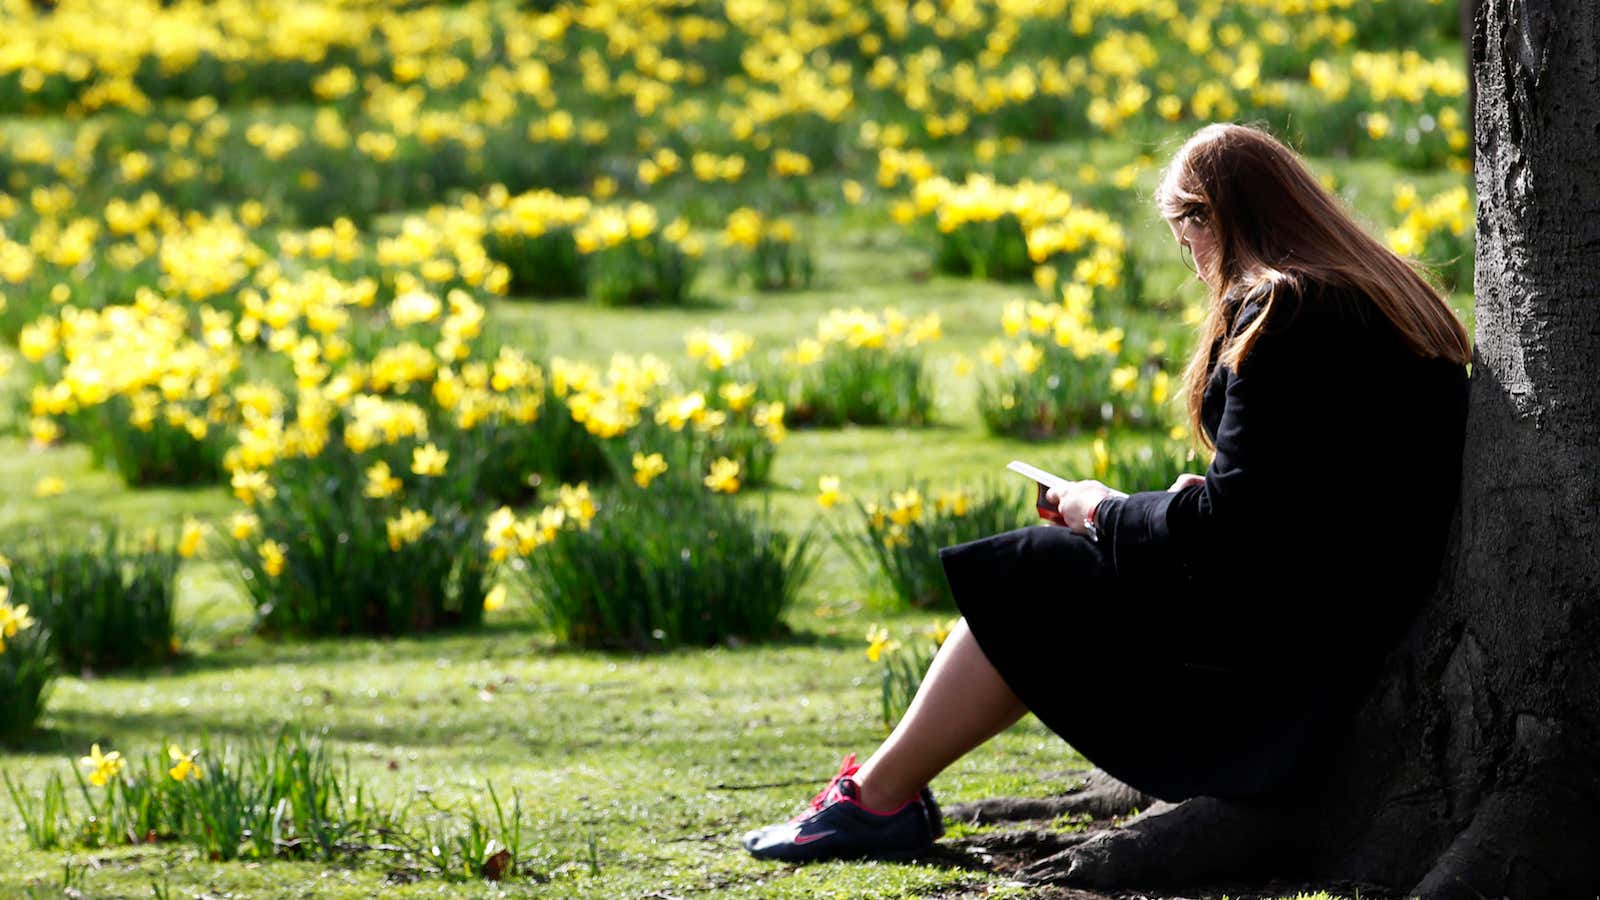 A woman sits and reads among daffodils in St James’s Park in London March 8, 2012.